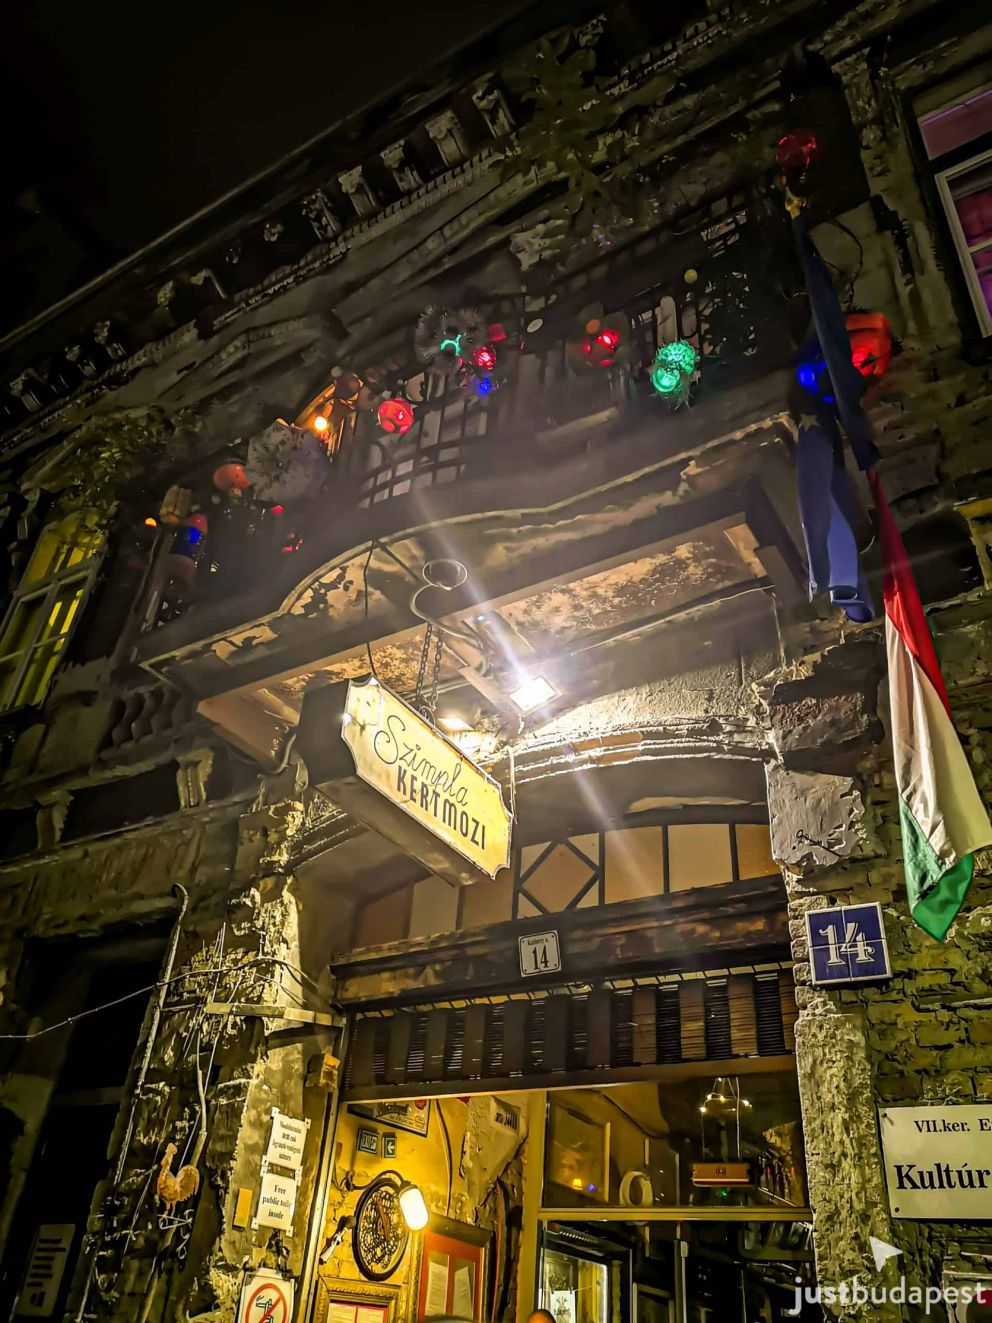 The iconic entrance sign of Szimpla Kert ruin pub in Budapest